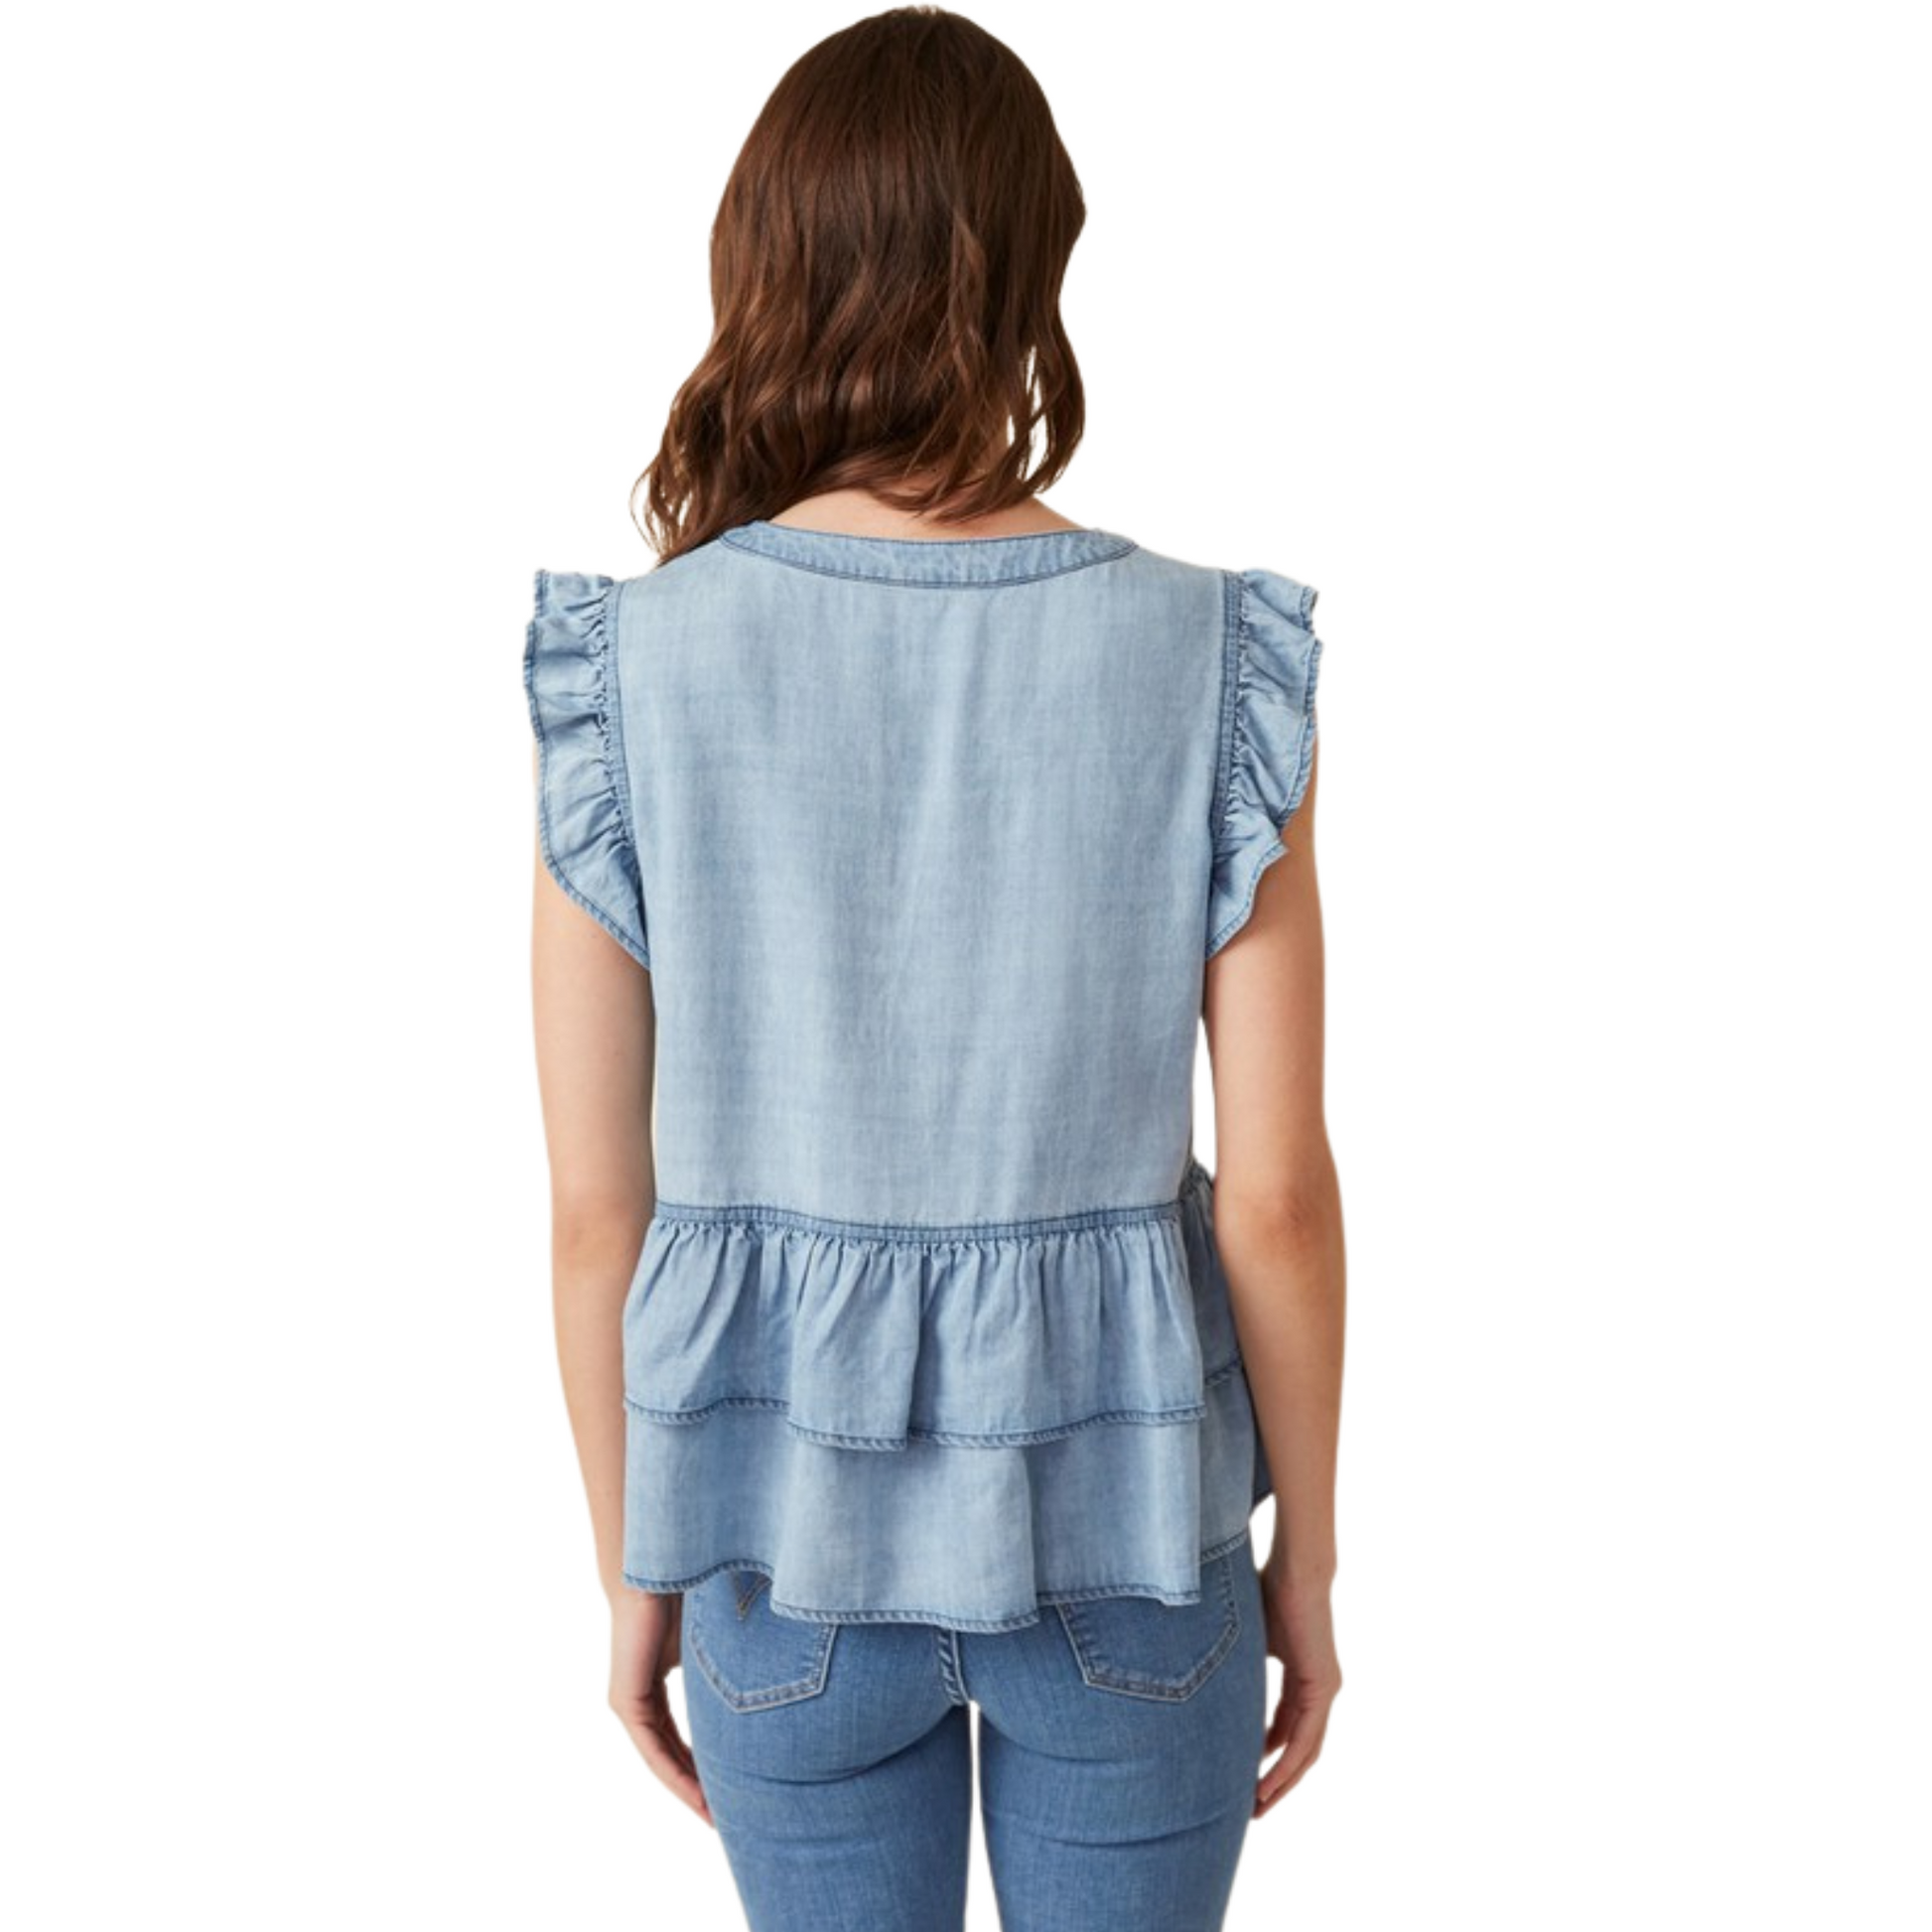 This Ruffled Denim Top is crafted from lightweight woven denim fabric with enriching button and ruffle details. Perfectly stylish and designed to flatter, it's an excellent choice for any warm weather ensemble.